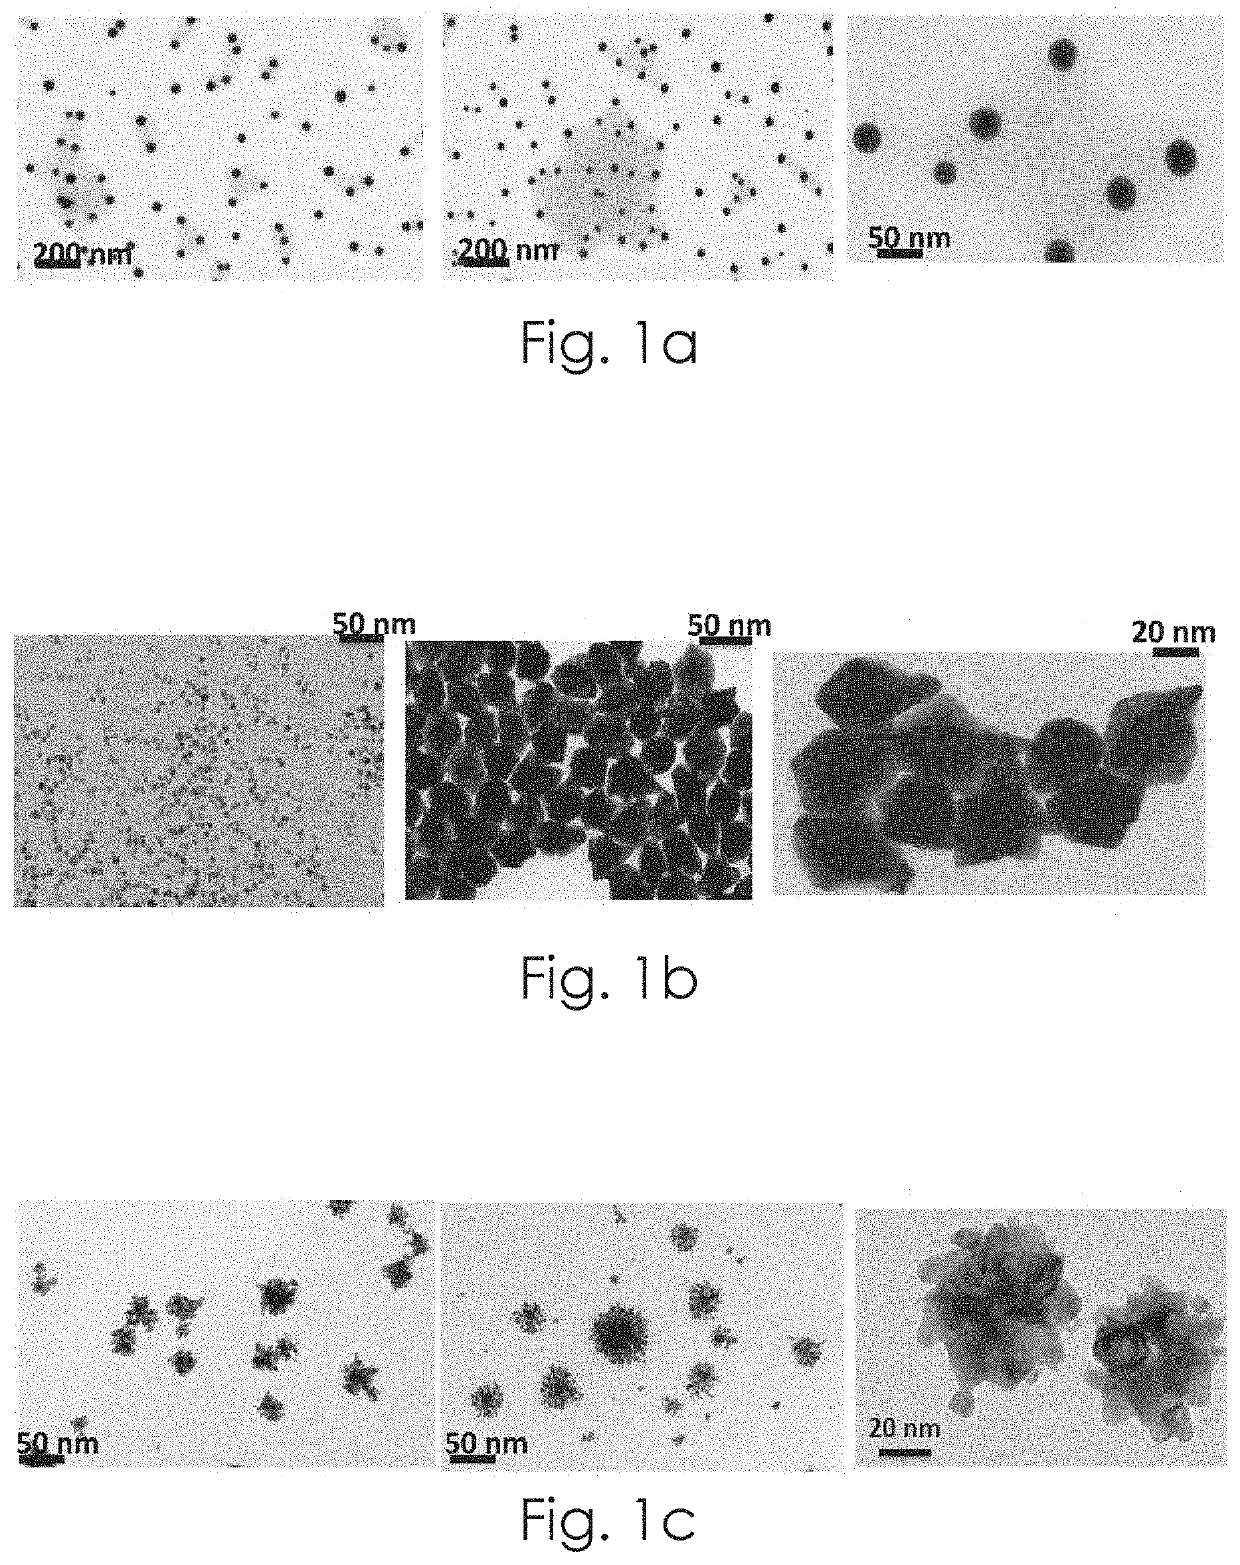 Nanomaterial and method of production of a nanomaterial for medical applications, such as MRI or sers